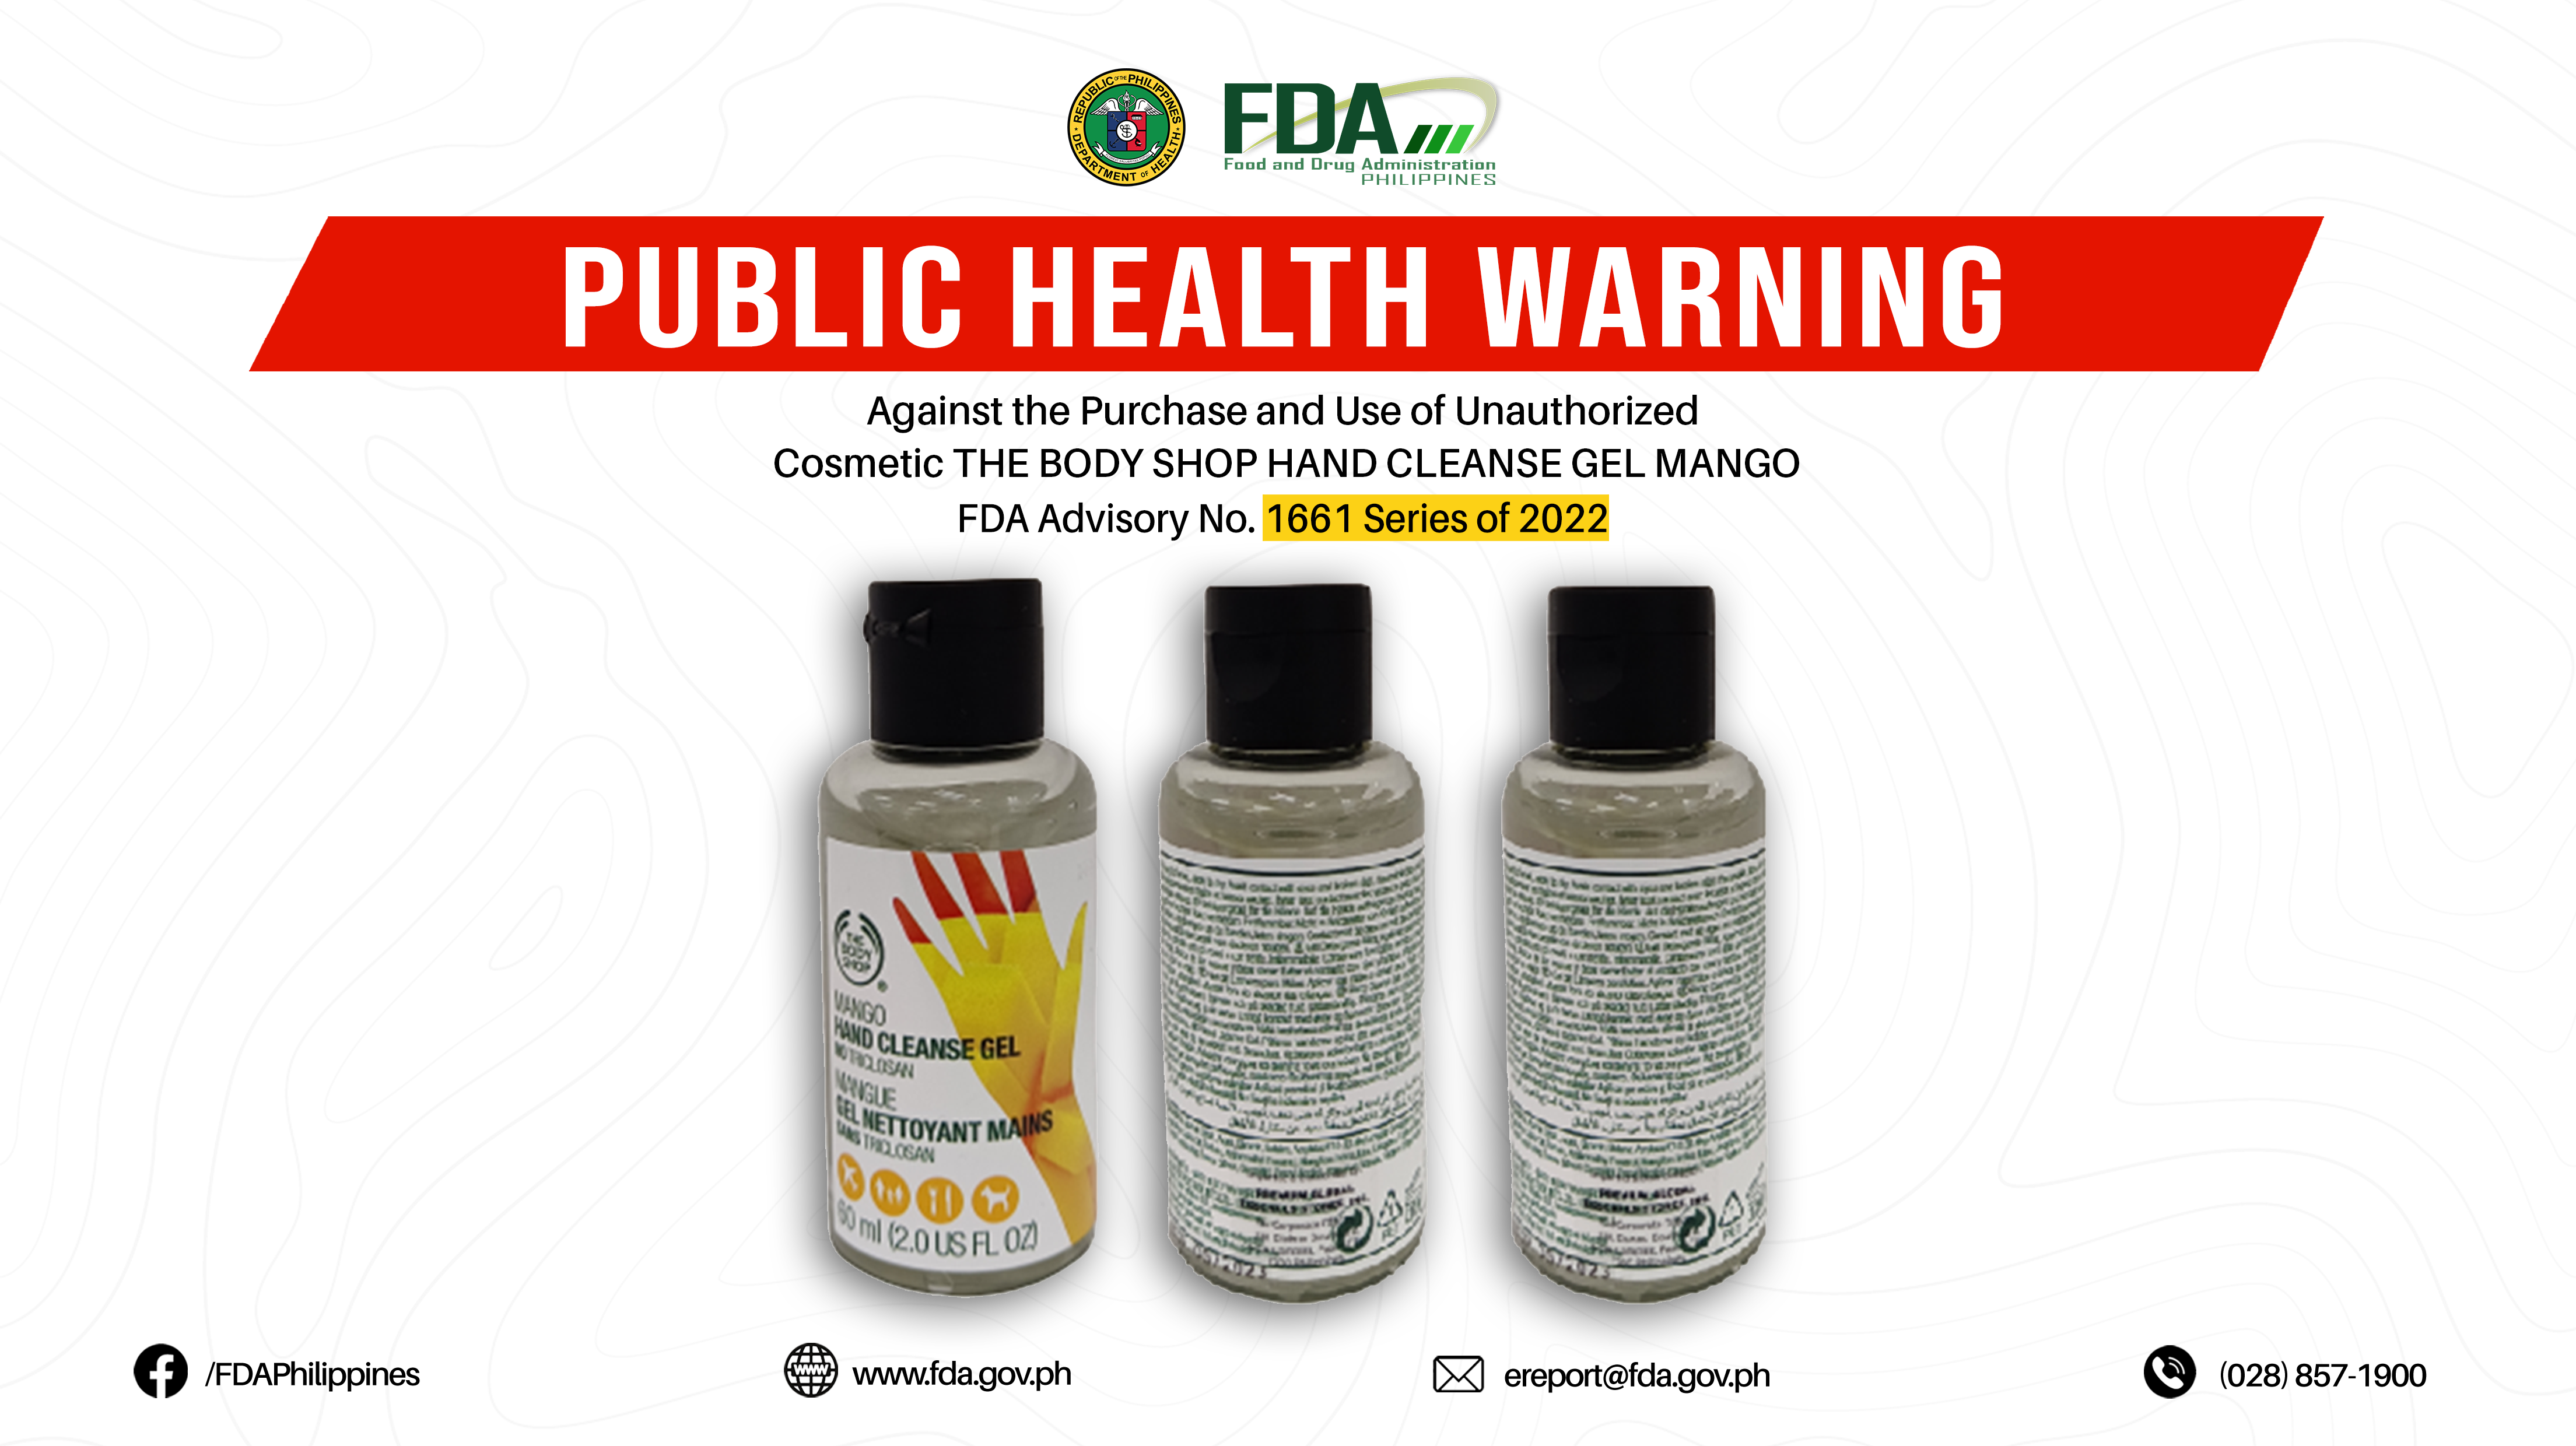 FDA Advisory No.2022-1661 || Public Health Warning Against the Purchase and Use of Unauthorized Cosmetic THE BODY SHOP HAND CLEANSE GEL MANGO